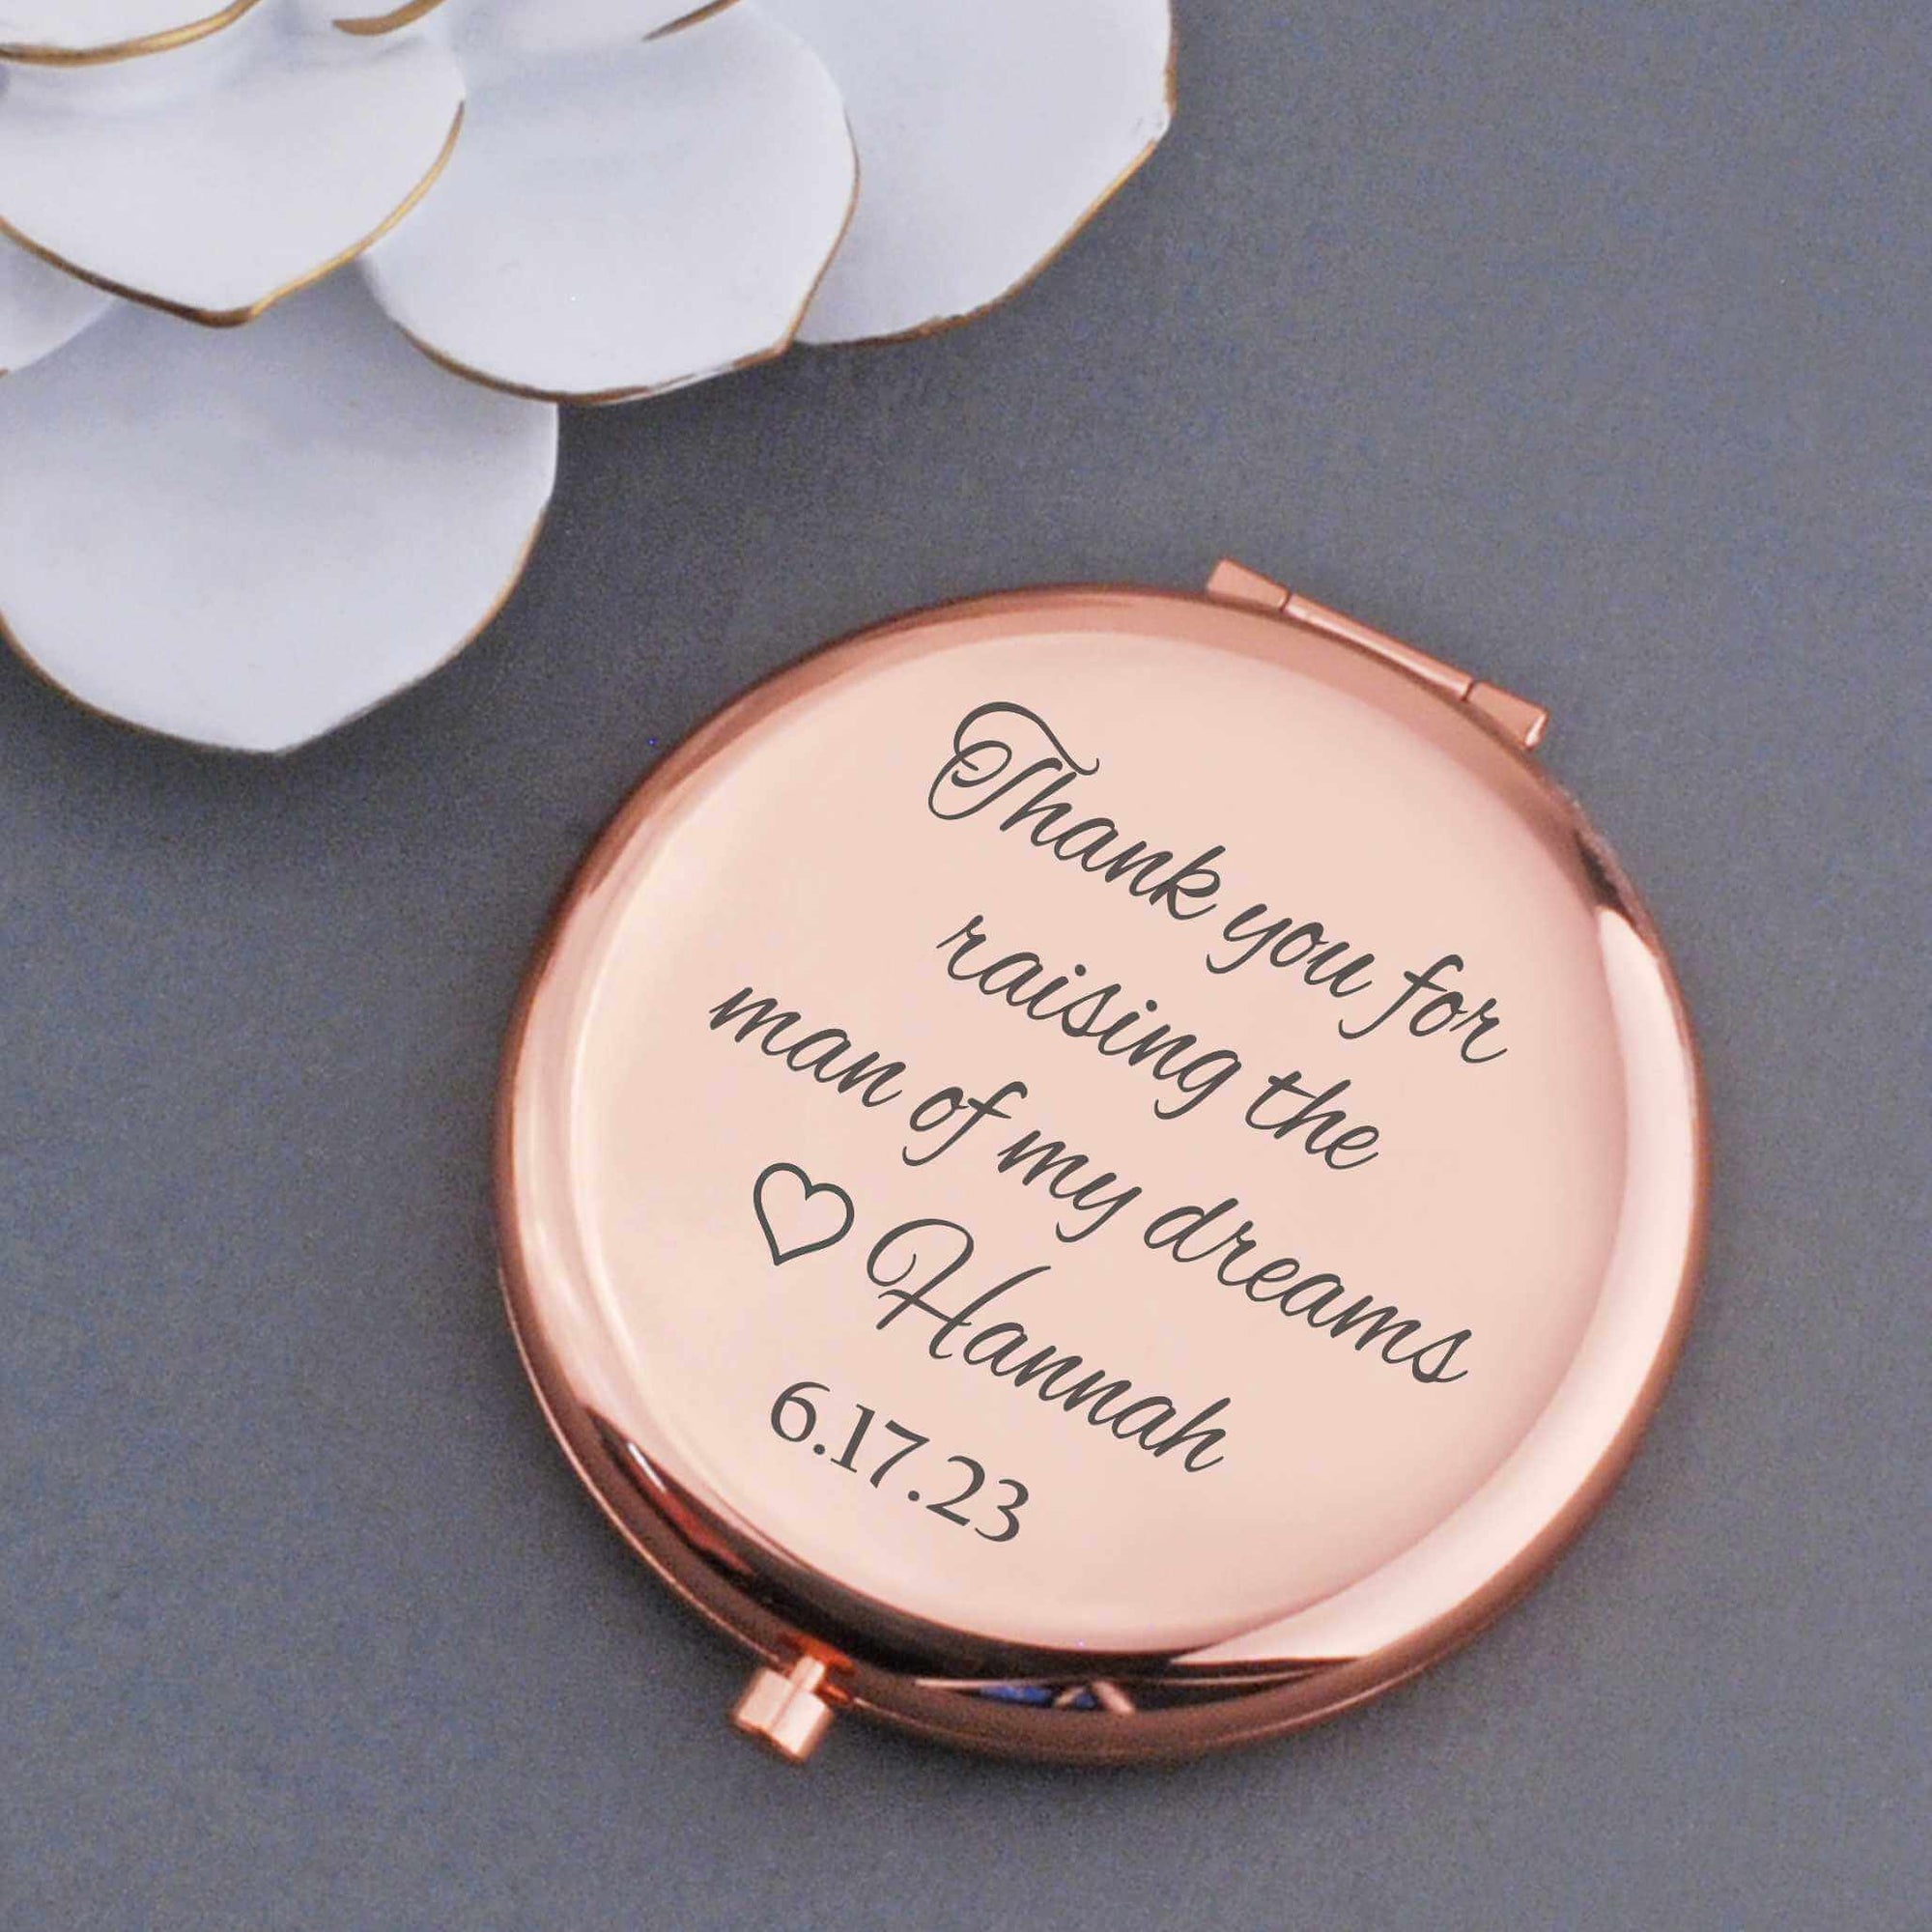 Thank You for Raising the Man of My Dreams - Compact Mirror